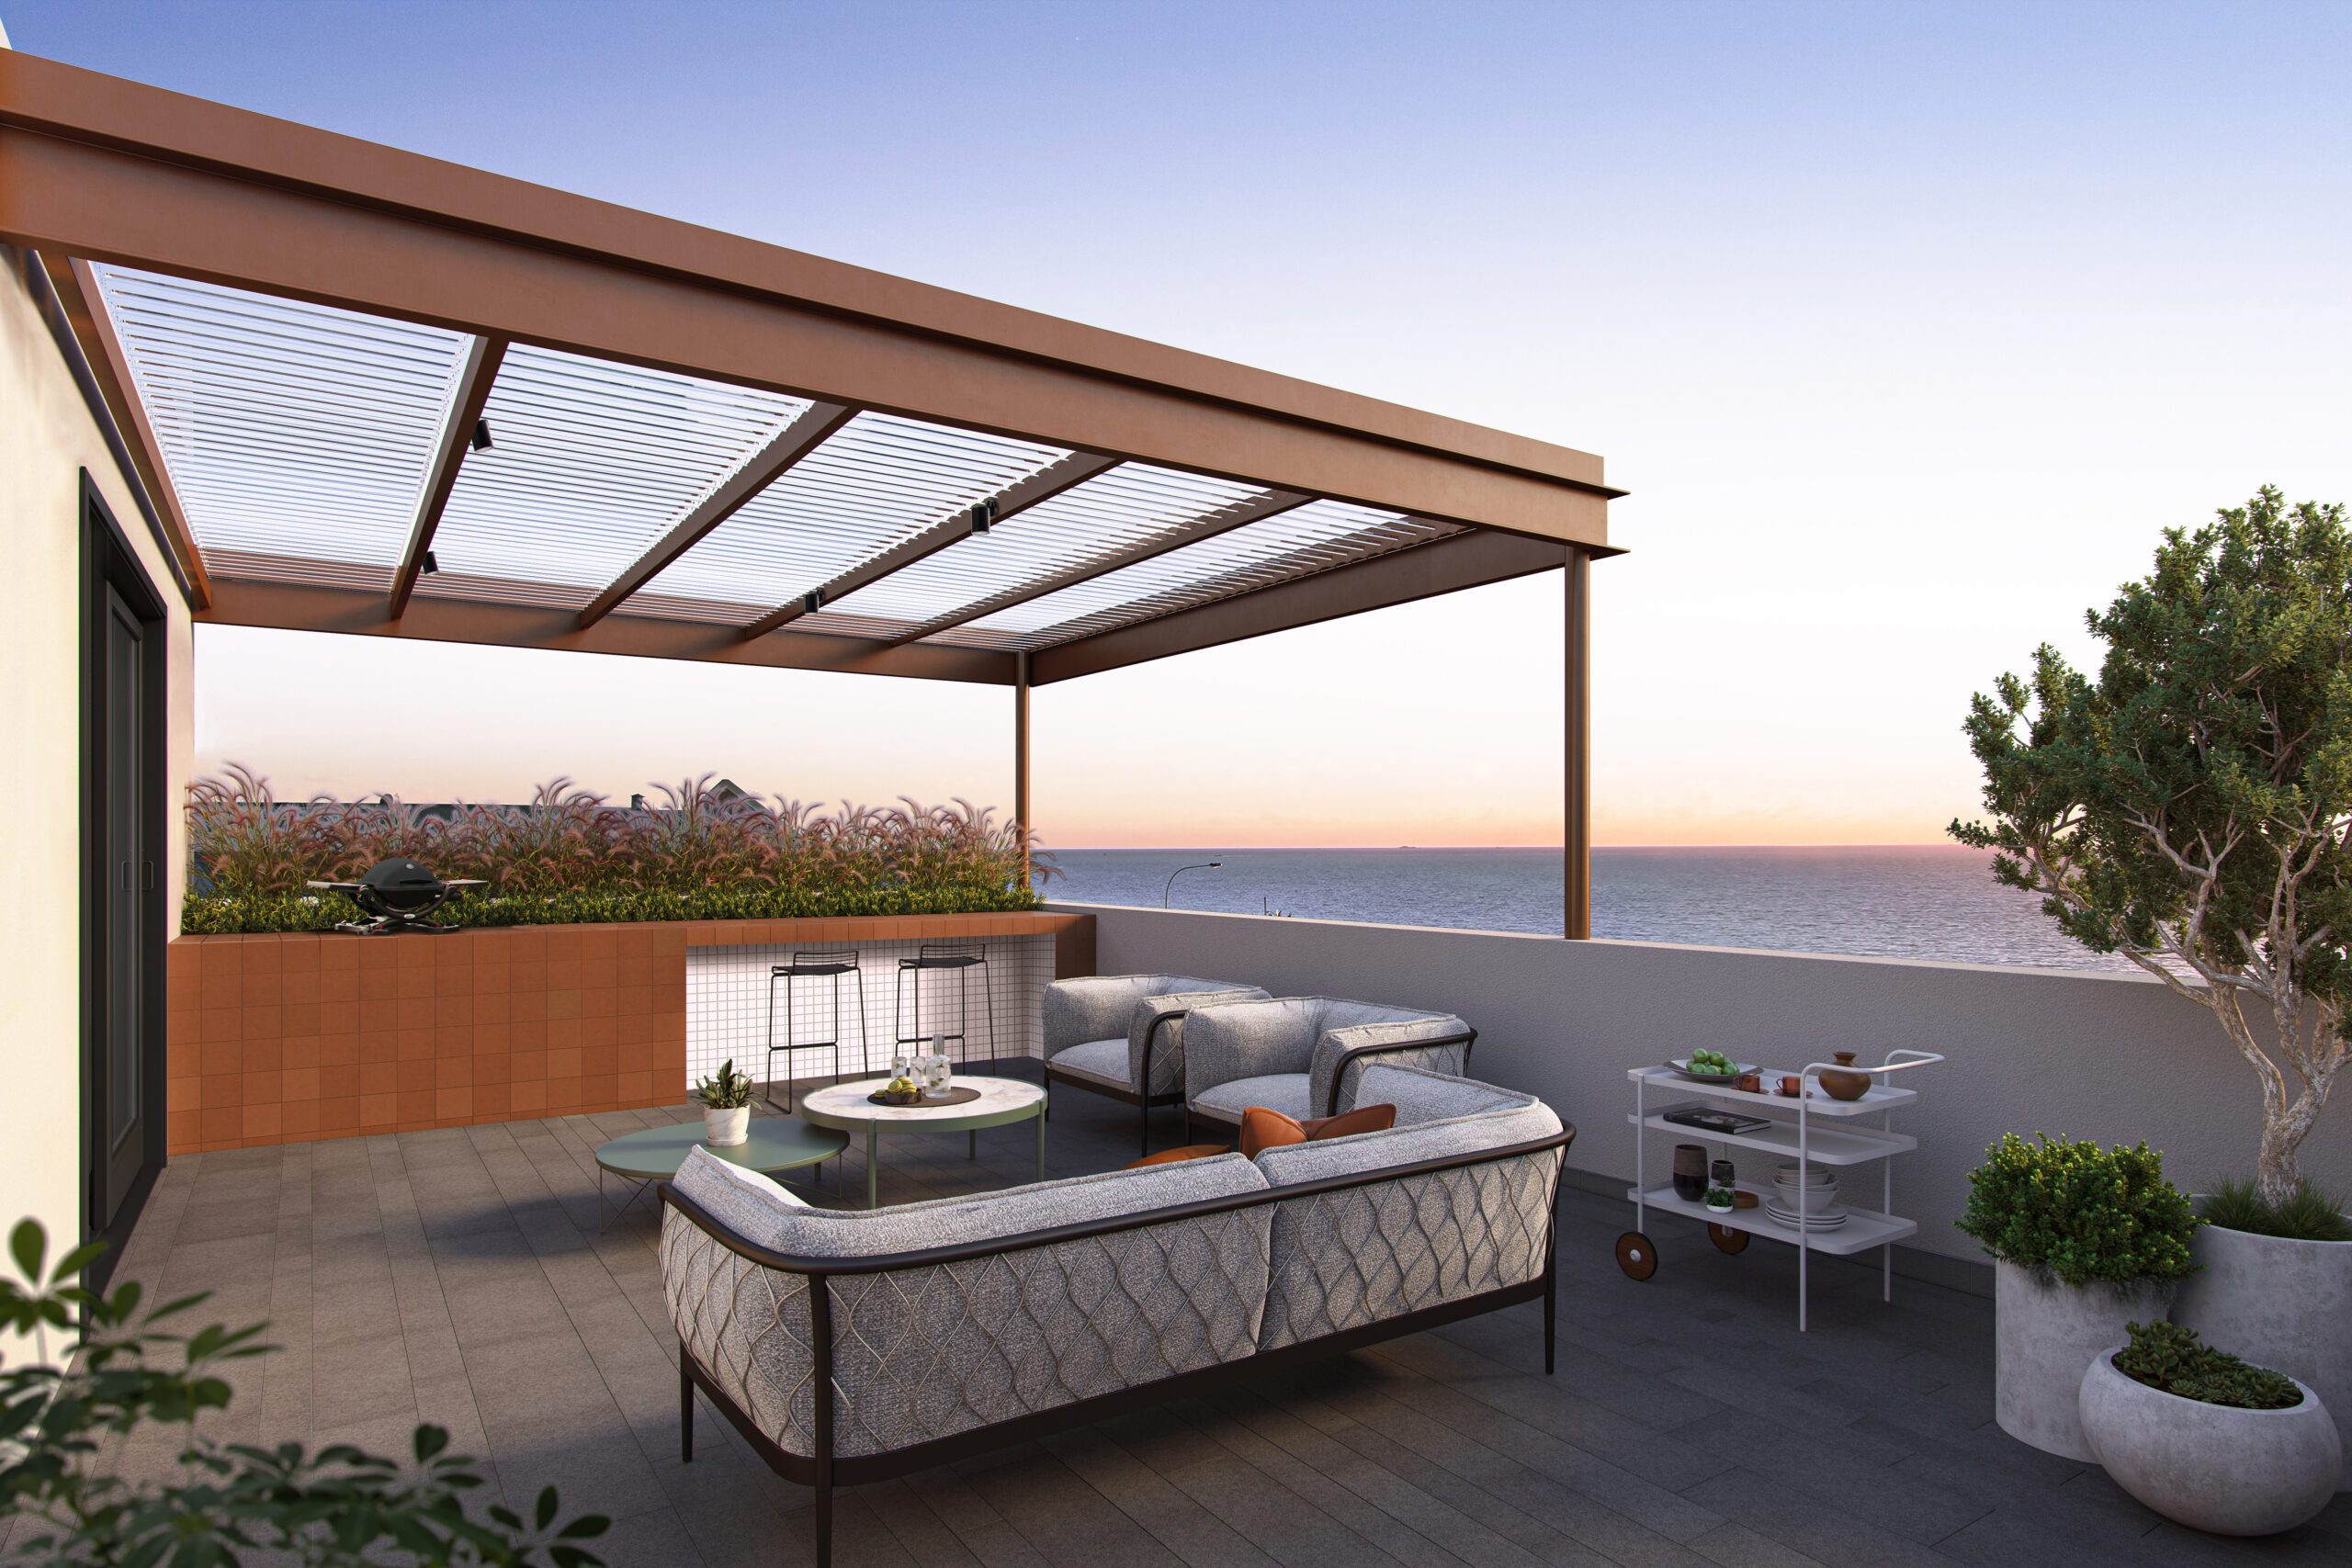 Your own private rooftop terrace is a secluded haven and entertainer’s paradise